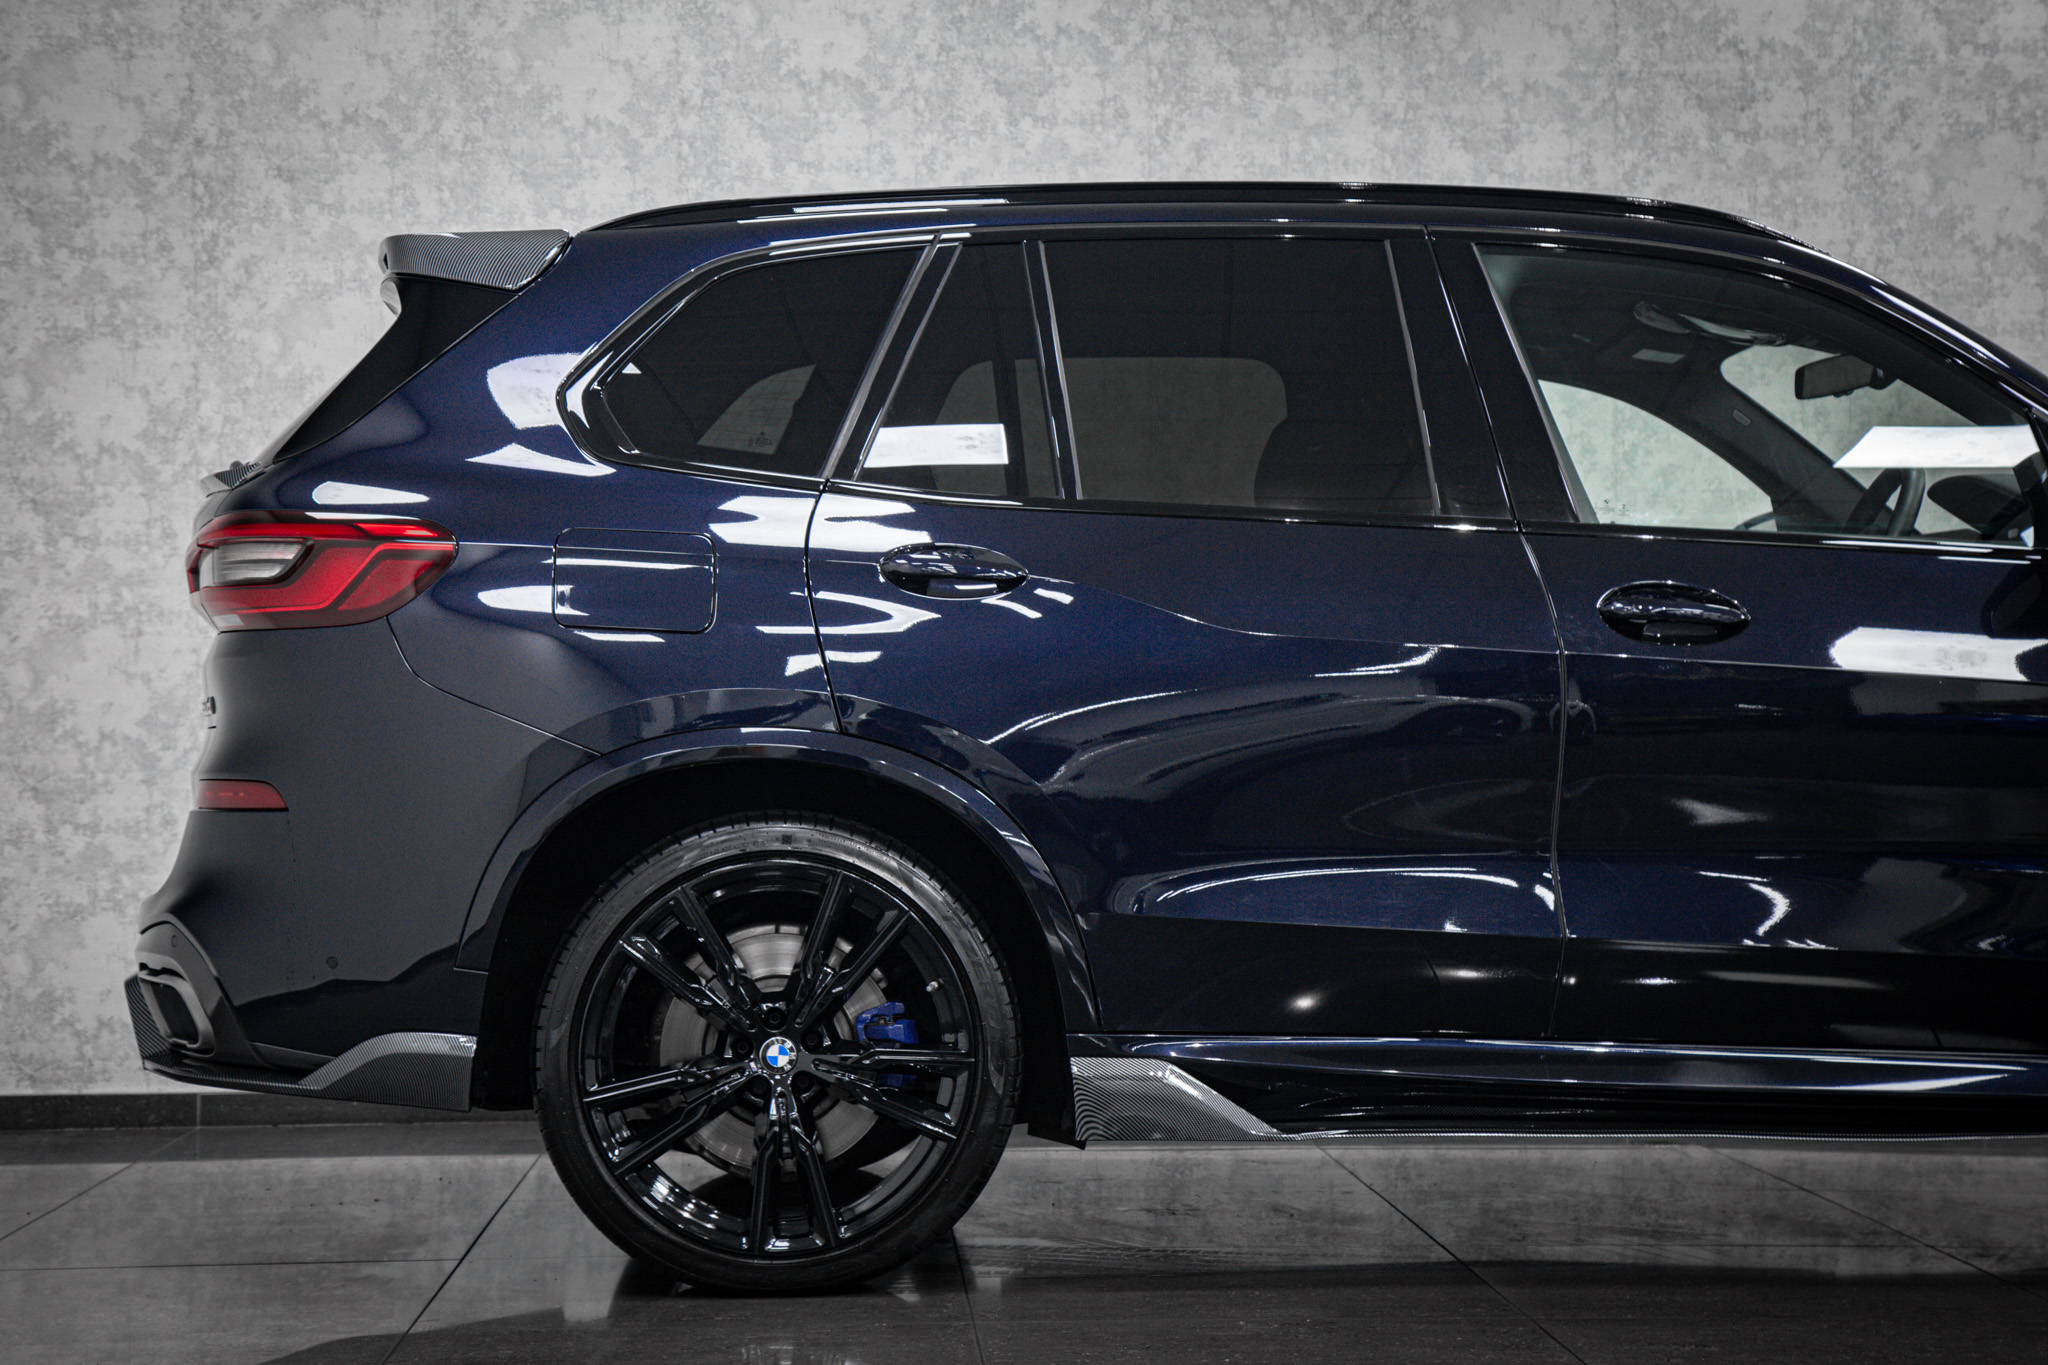 https://rivierastyling.co.uk/wp-content/uploads/2020/10/BMW-X5-G05-Carbon-Look-Body-Kit-09.jpg